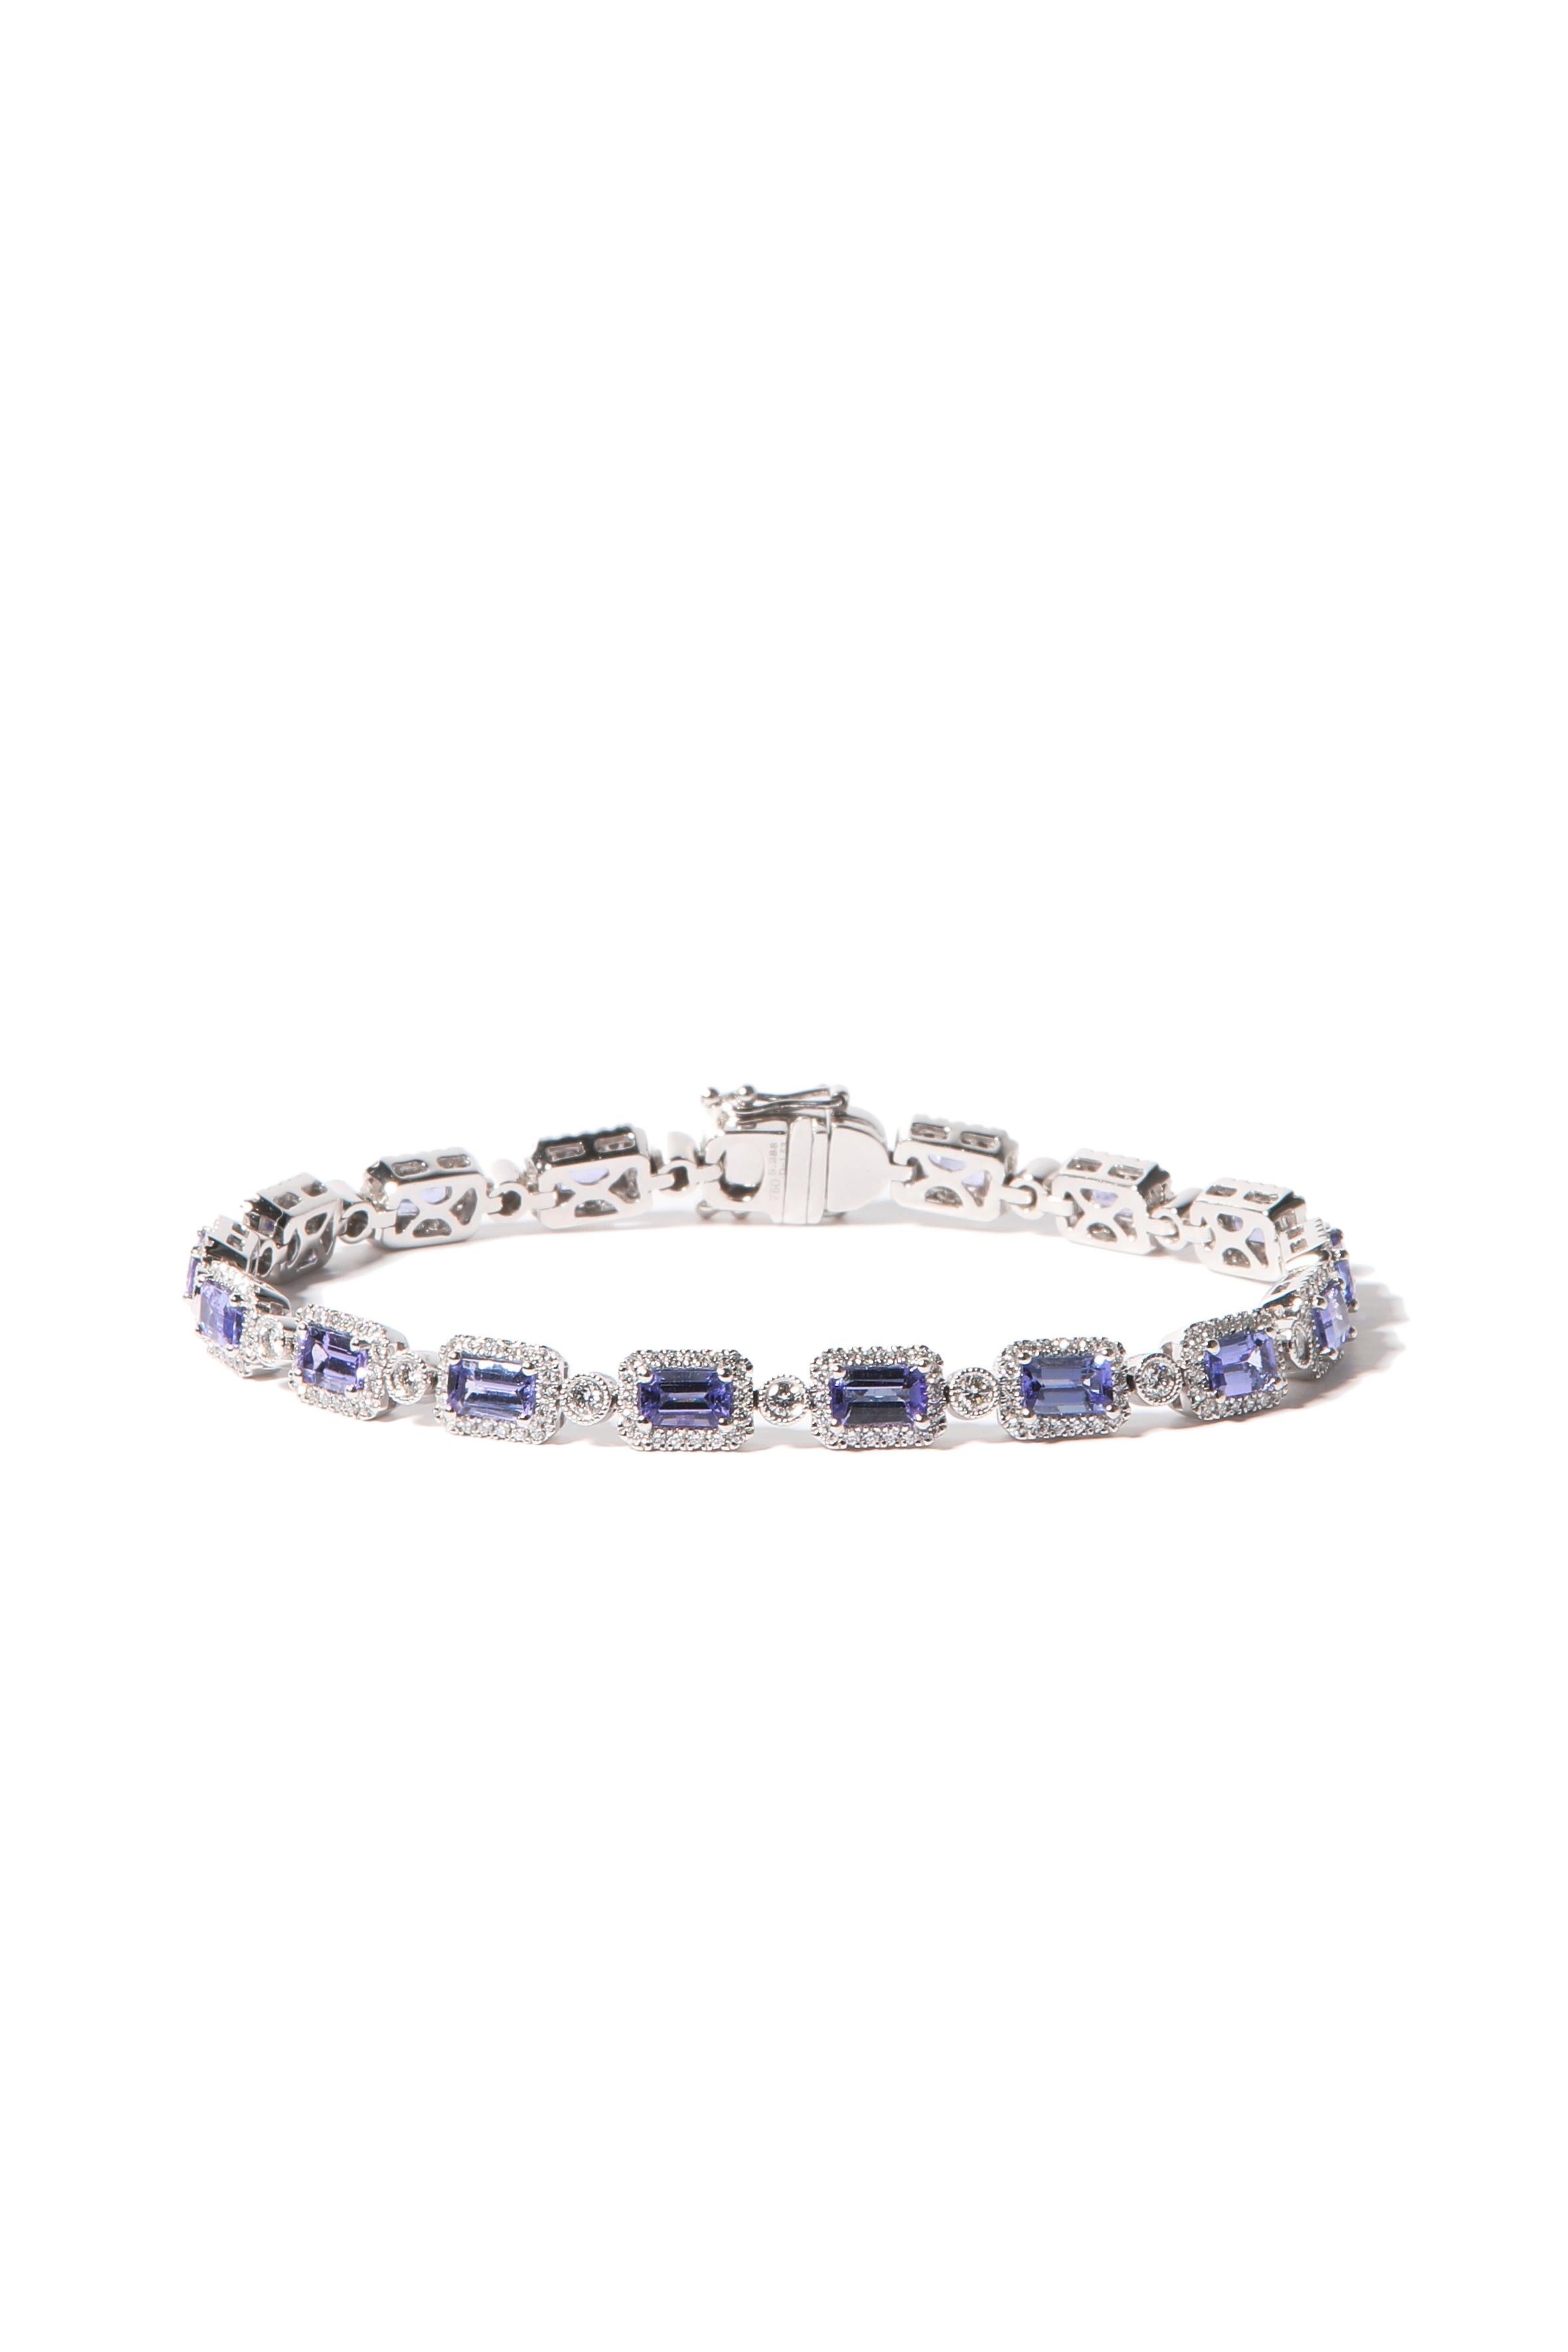 Emerald cut tanzanites grace this extraordinary bracelet.

The bracelet is made in 18kt white gold and is set with 17 emerald cut tanzanites weighing 5.29 carat and 1.53ct round brilliant cut diamonds. The links connecting the sapphires are set with